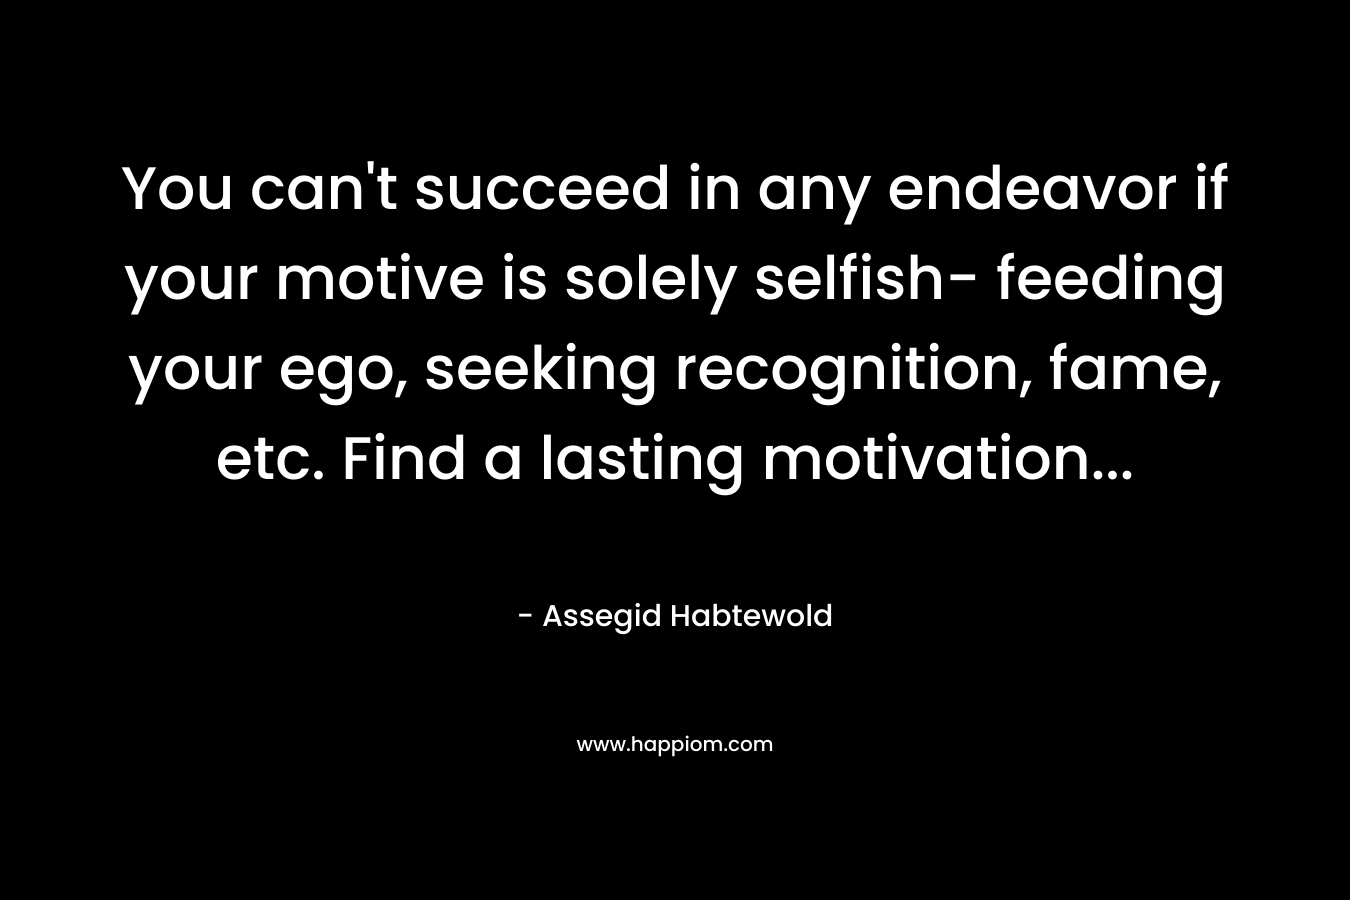 You can’t succeed in any endeavor if your motive is solely selfish- feeding your ego, seeking recognition, fame, etc. Find a lasting motivation… – Assegid Habtewold